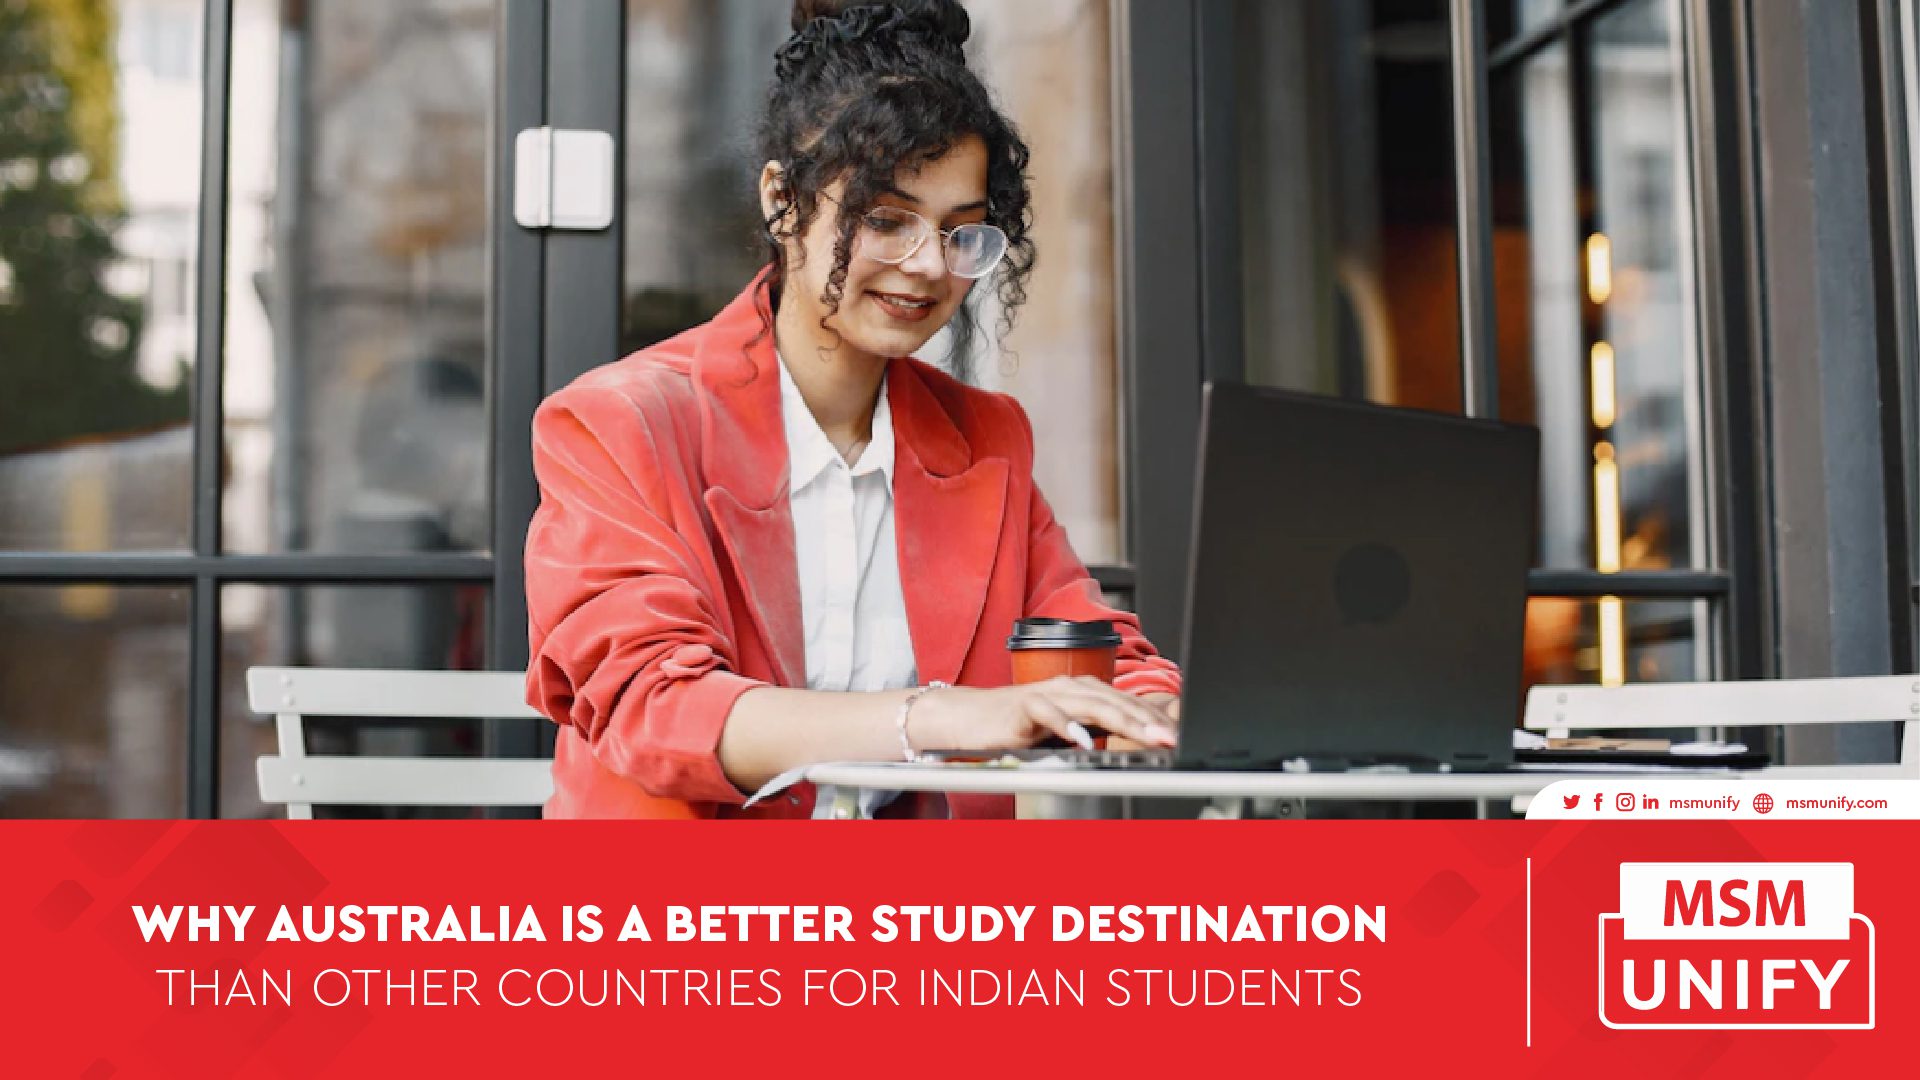 011323 MSM Unify Why Australia is a Better Study Destination Than Other Countries for Indian Students 01 1